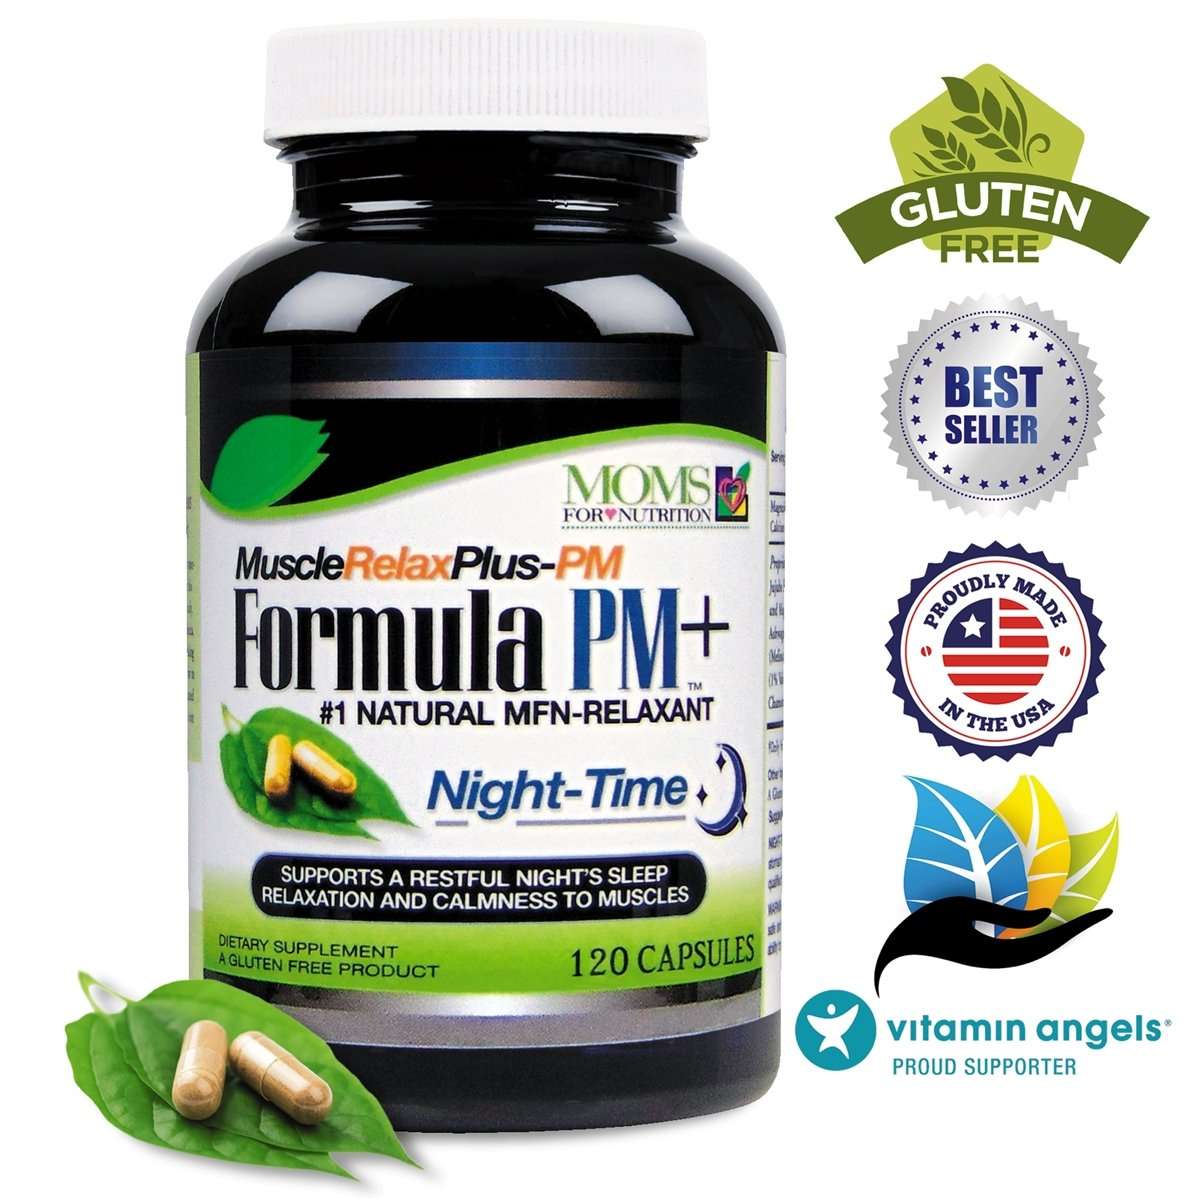 #1 All Natural Muscle Relax Formula PM Plus